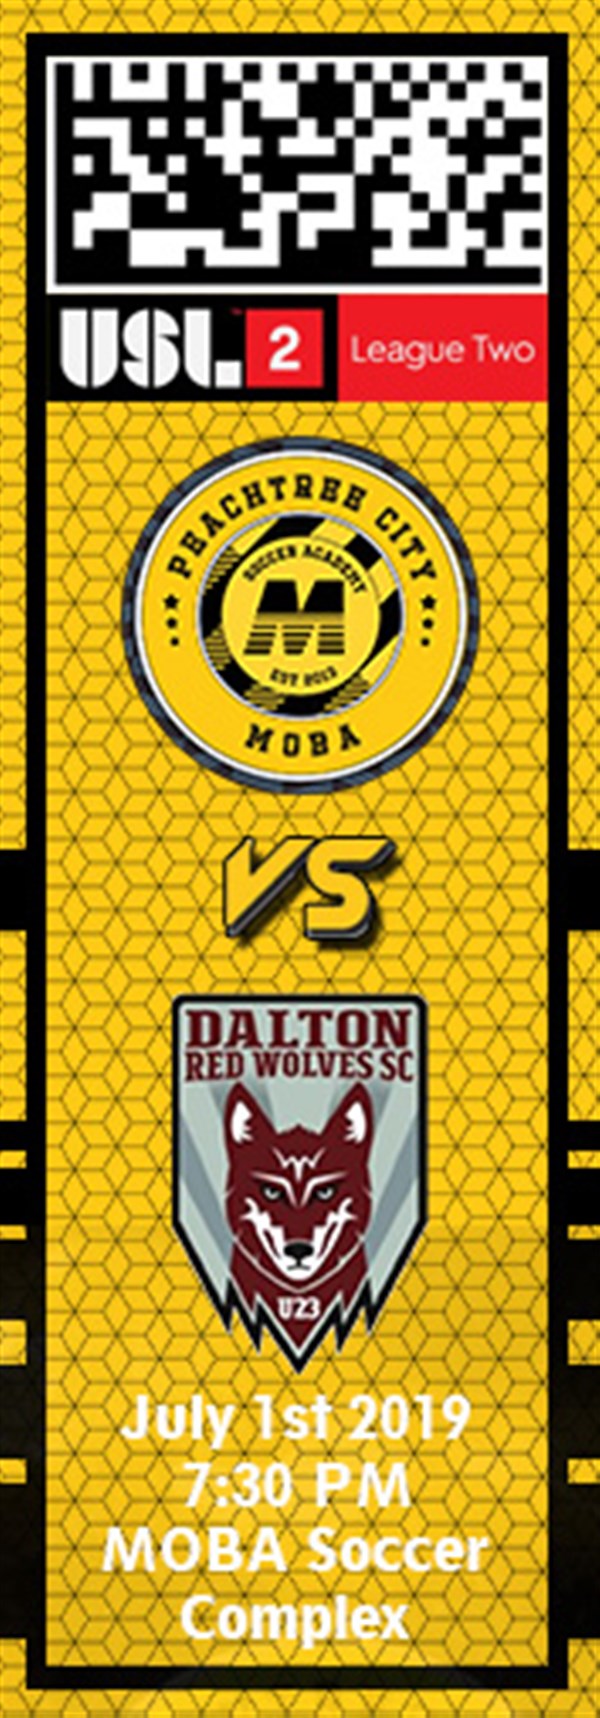 Get Information and buy tickets to PTC MOBA vs. Dalton Red Wolves USL2 on MOBA Soccer Academy